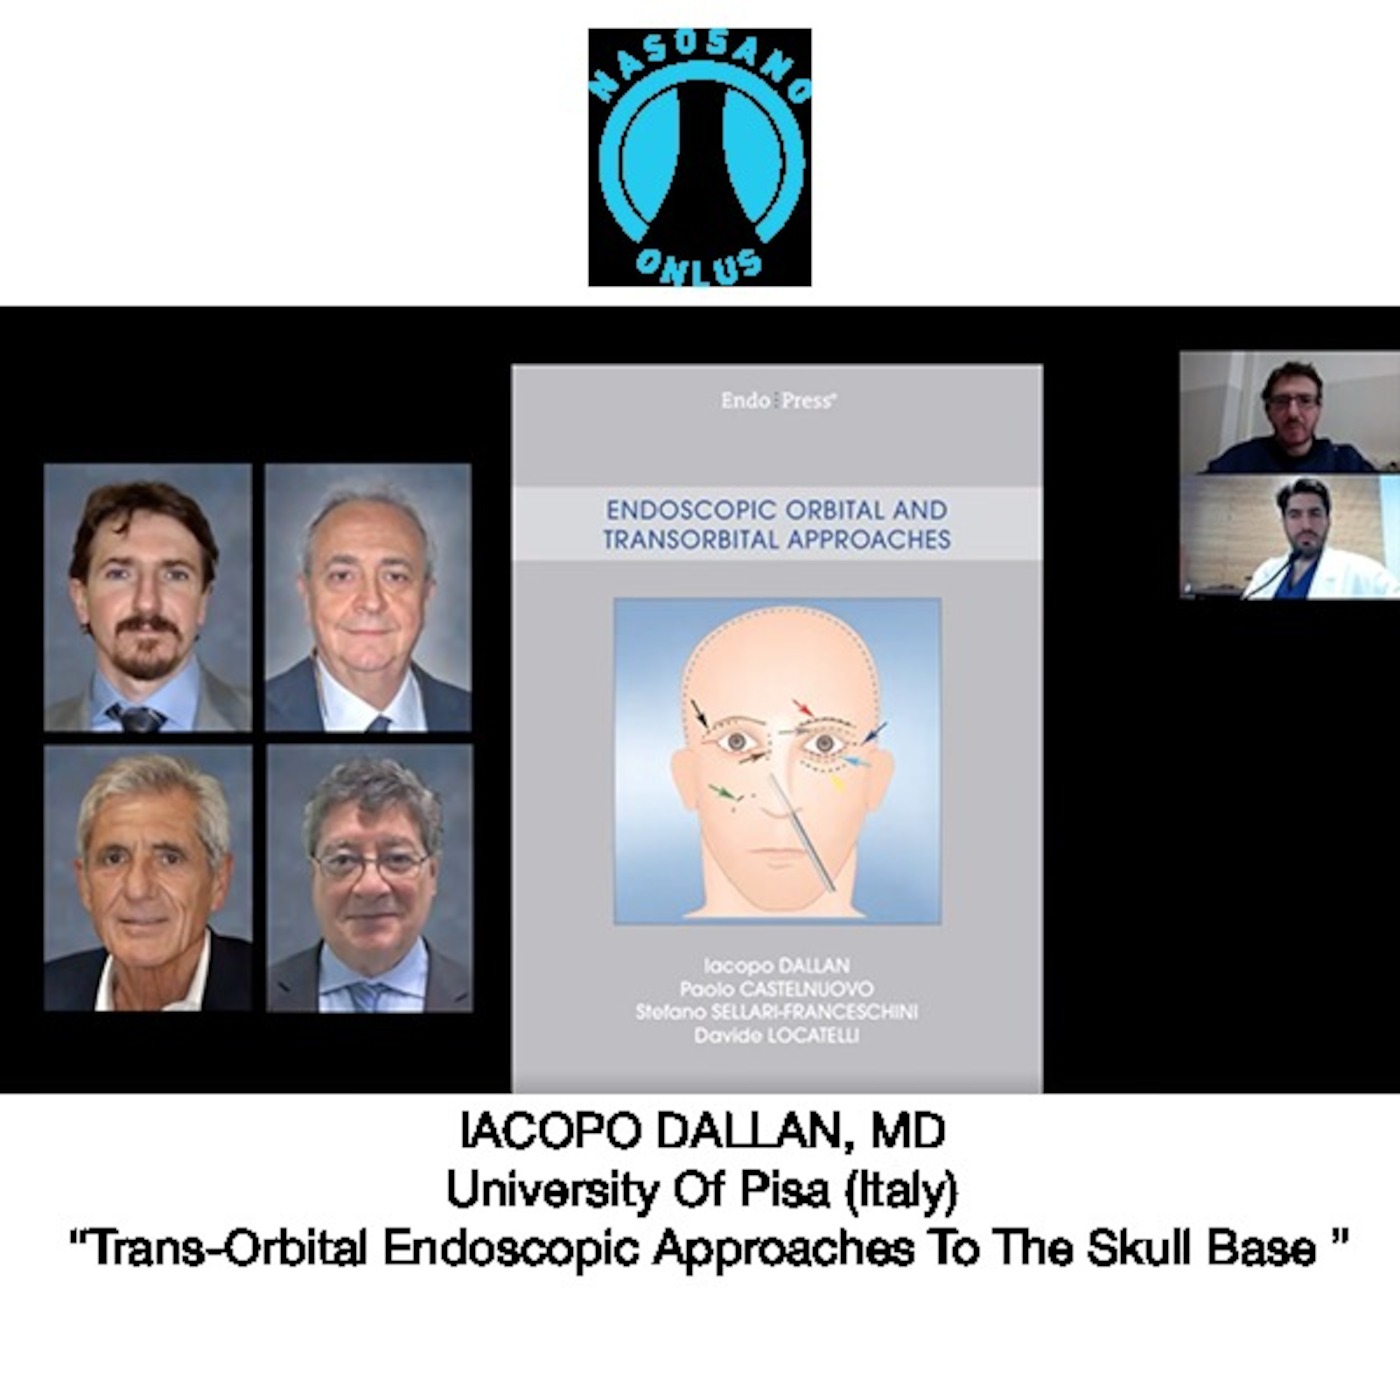 Trans-Orbital Endoscopic Approaches To The Skull Base